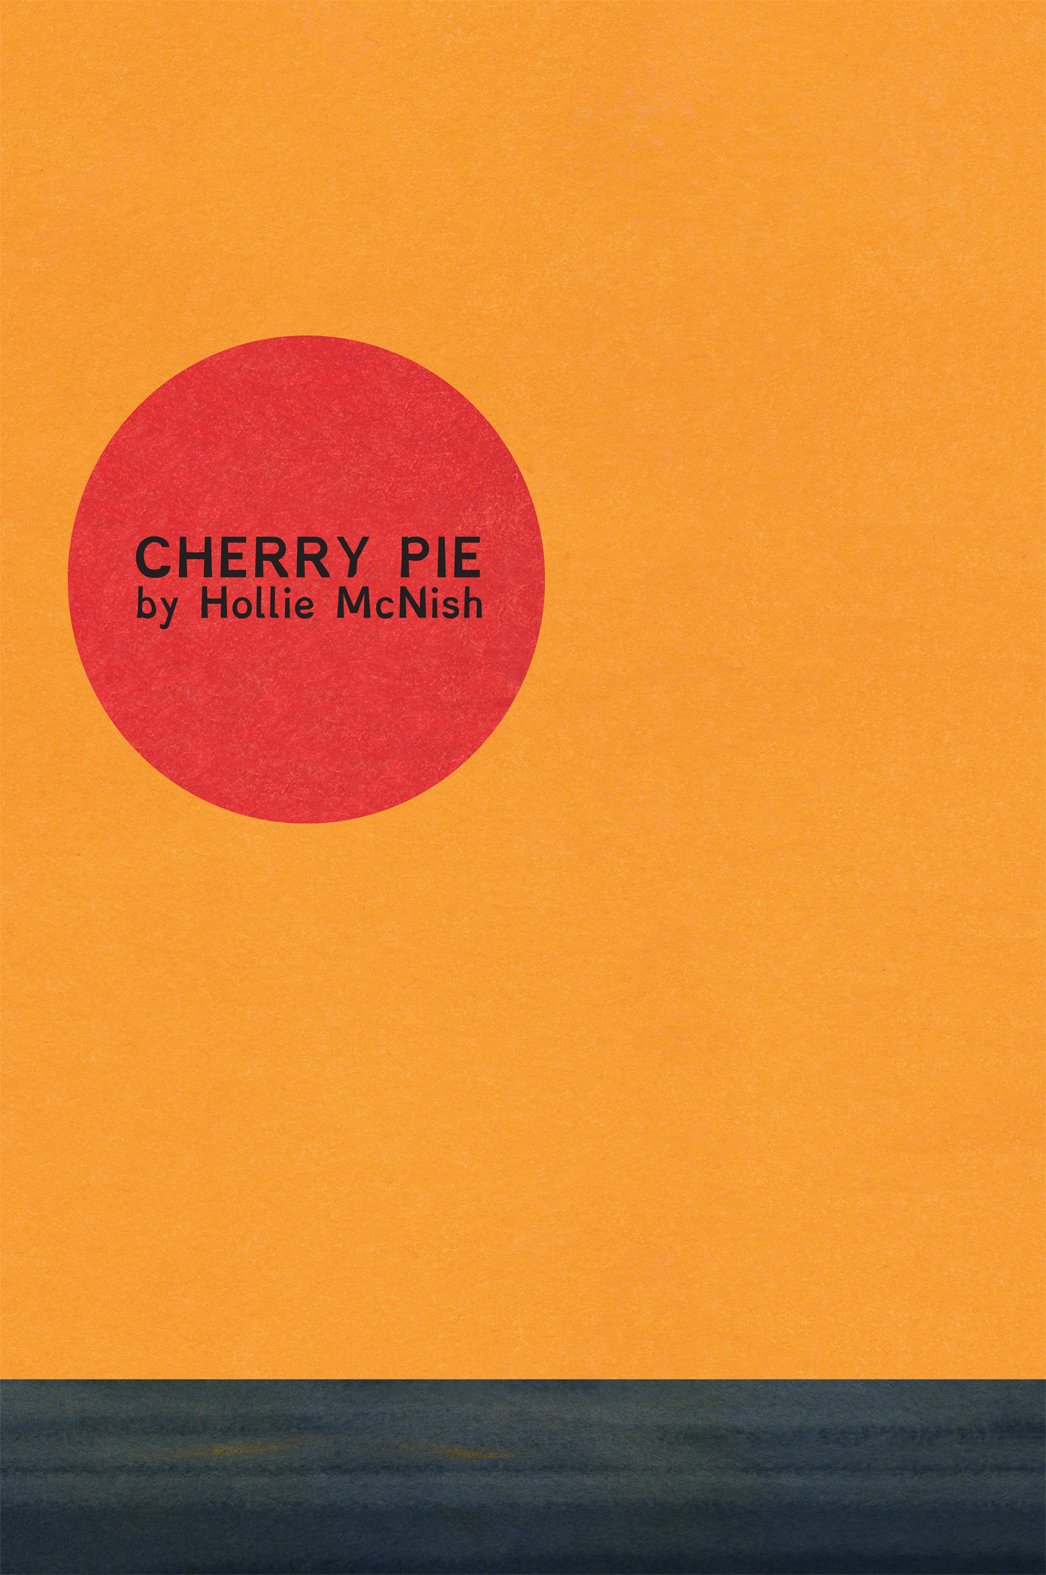 Image of Cherry Pie by Hollie McNish